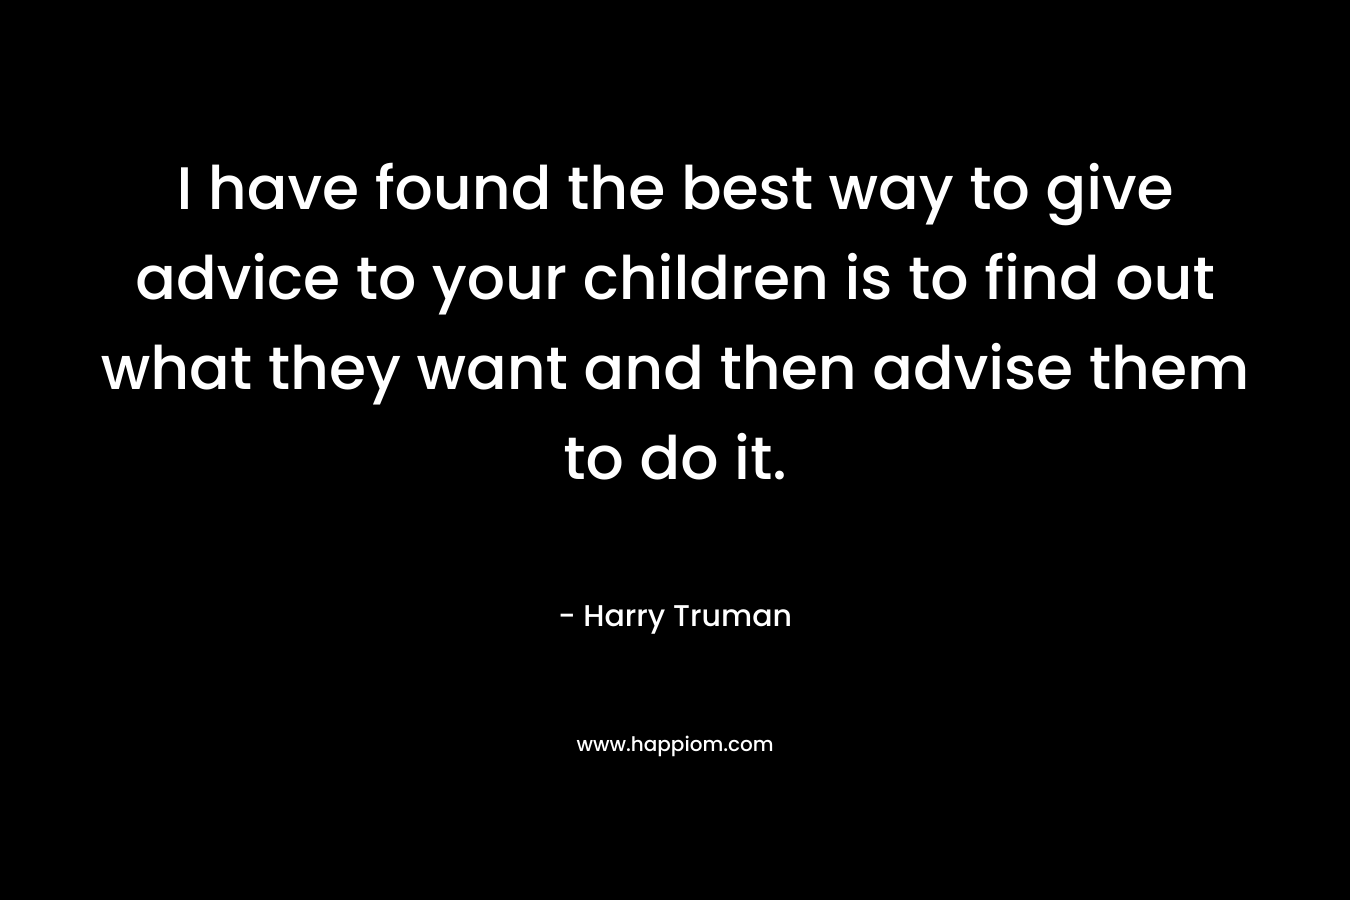 I have found the best way to give advice to your children is to find out what they want and then advise them to do it. – Harry Truman